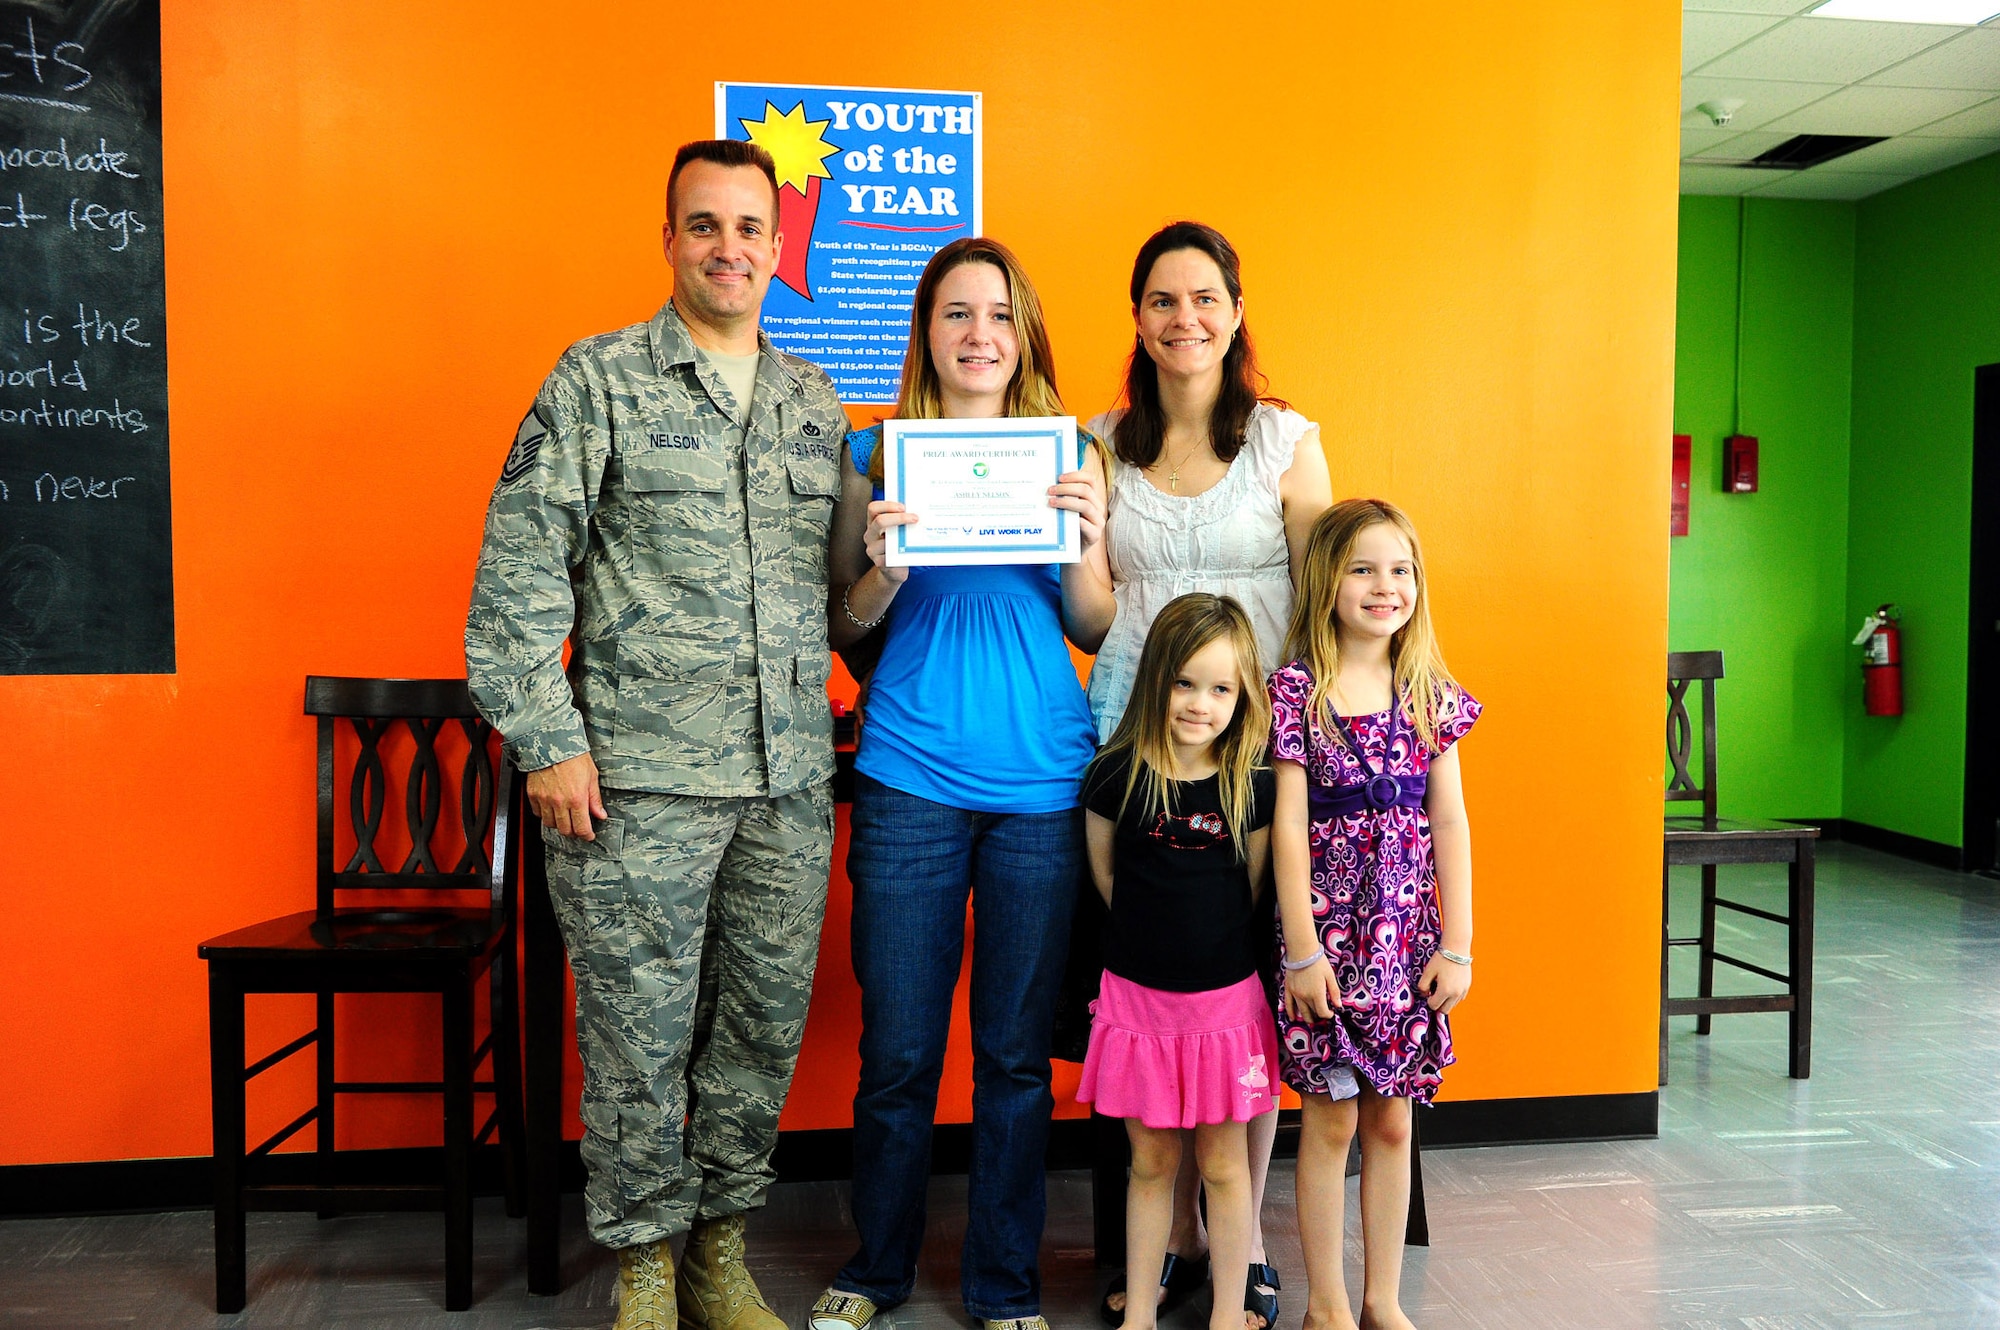 Ashley Nelson, daughter of Master Sgt. Dennis Nelson, 36th Civil Engineer Squadron, poses with her family after winning an Air Force writing contest. The contest was sponsored by MyAirForceLife.com and the $2,000 prize package includes a new computer and $500 gift card. (U.S. Air Force photo by Tech. Sgt. Mike Andriacco)